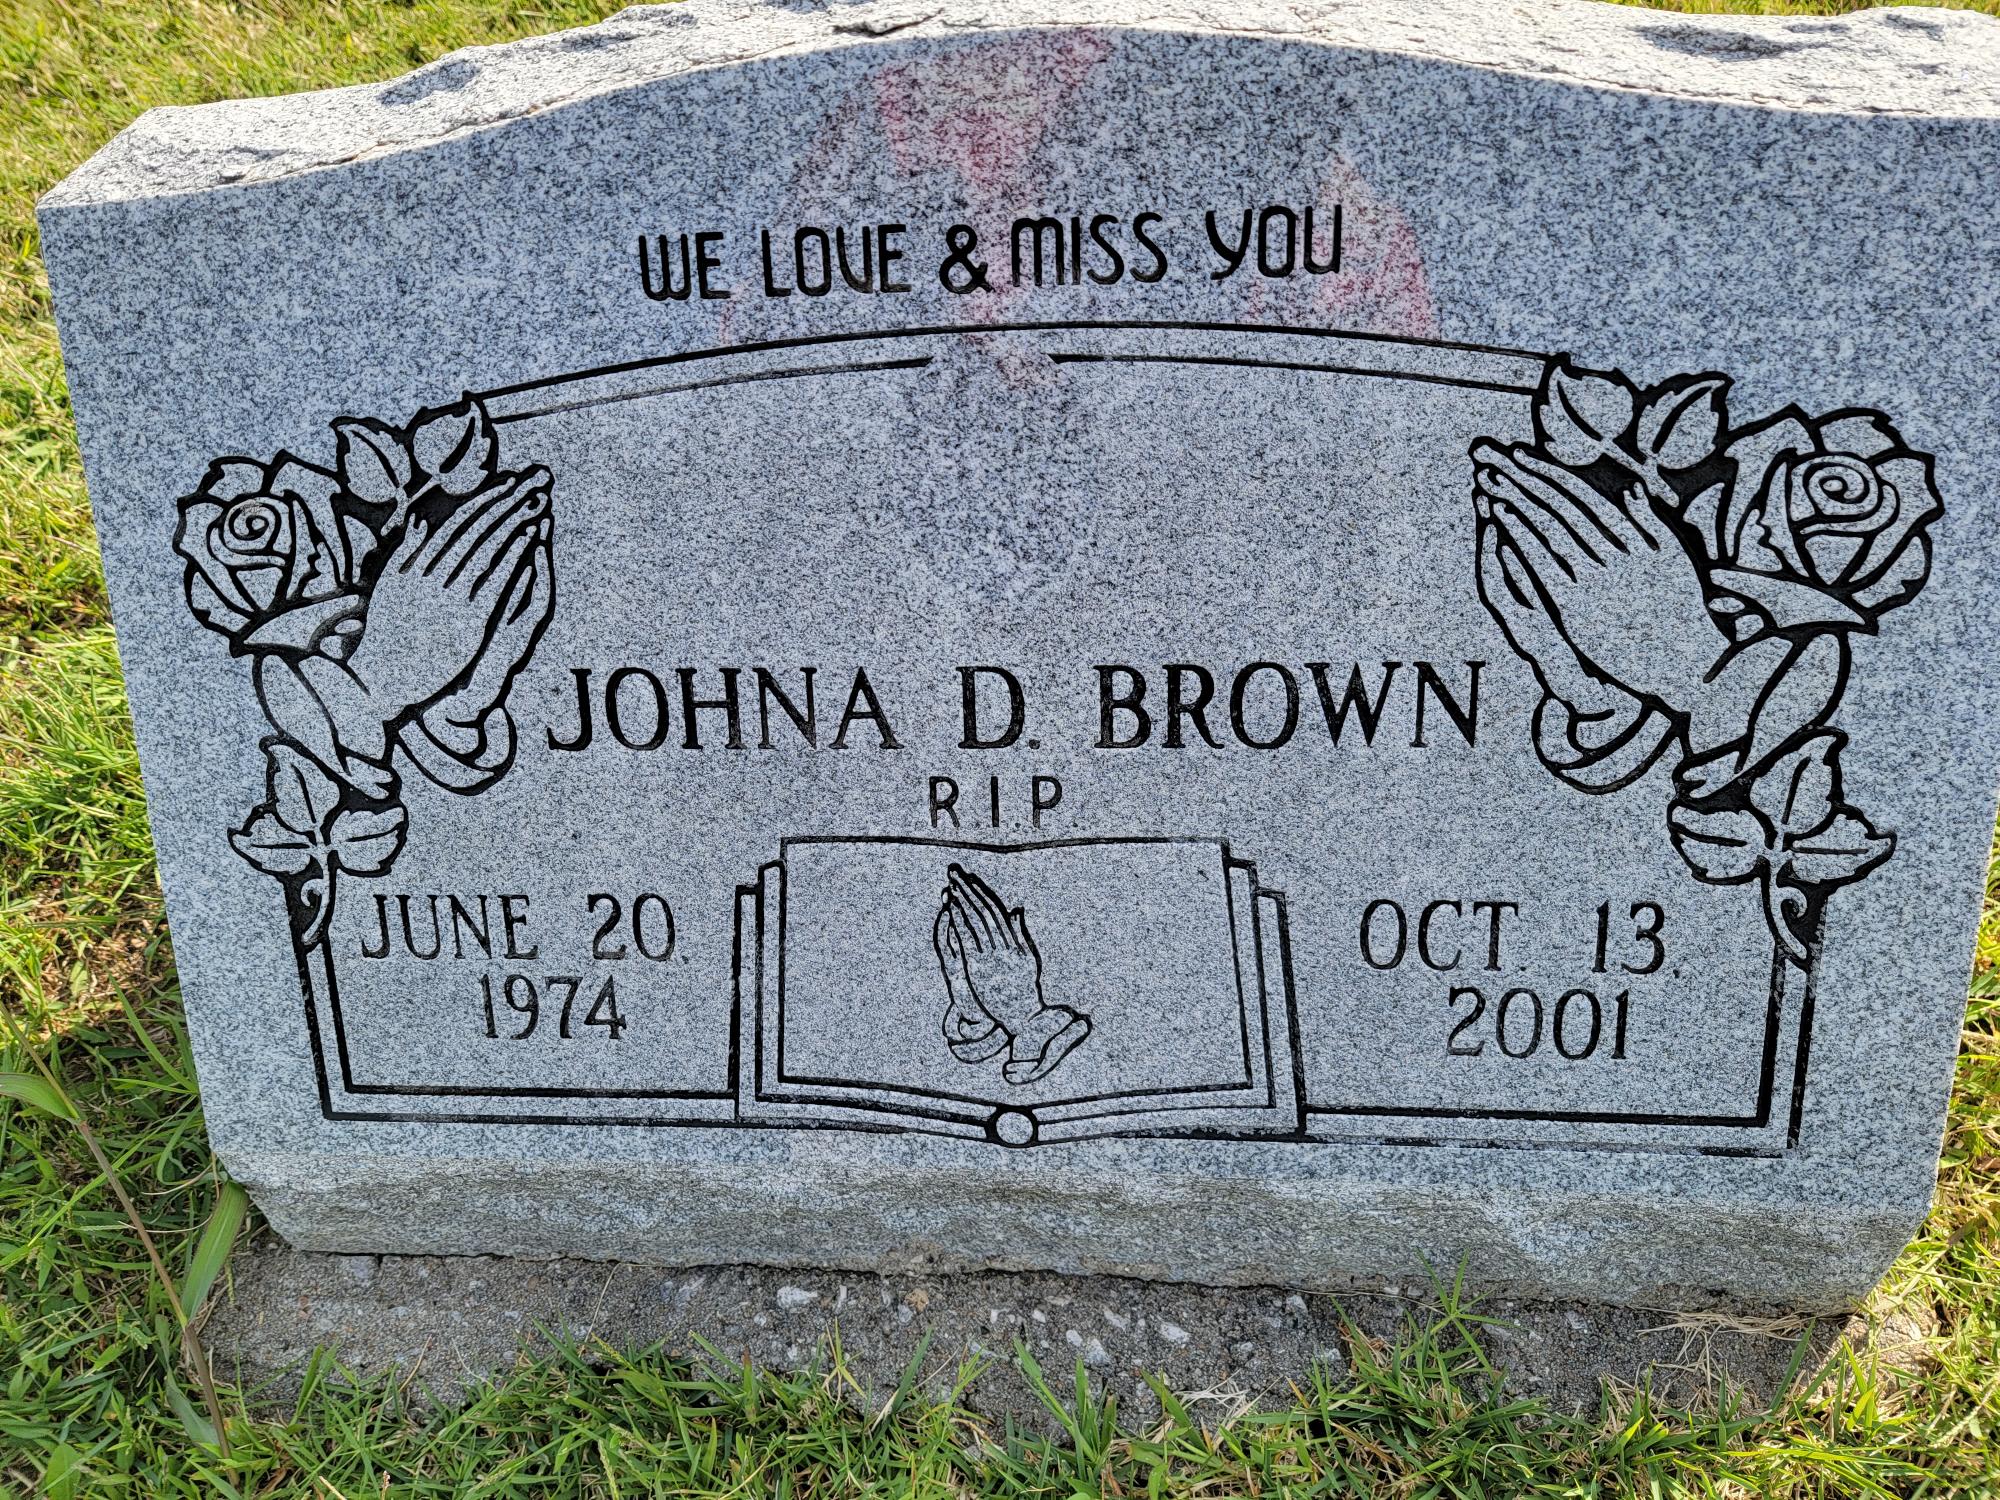 Gravestone with name in center with praying hands and roses on top two corners.